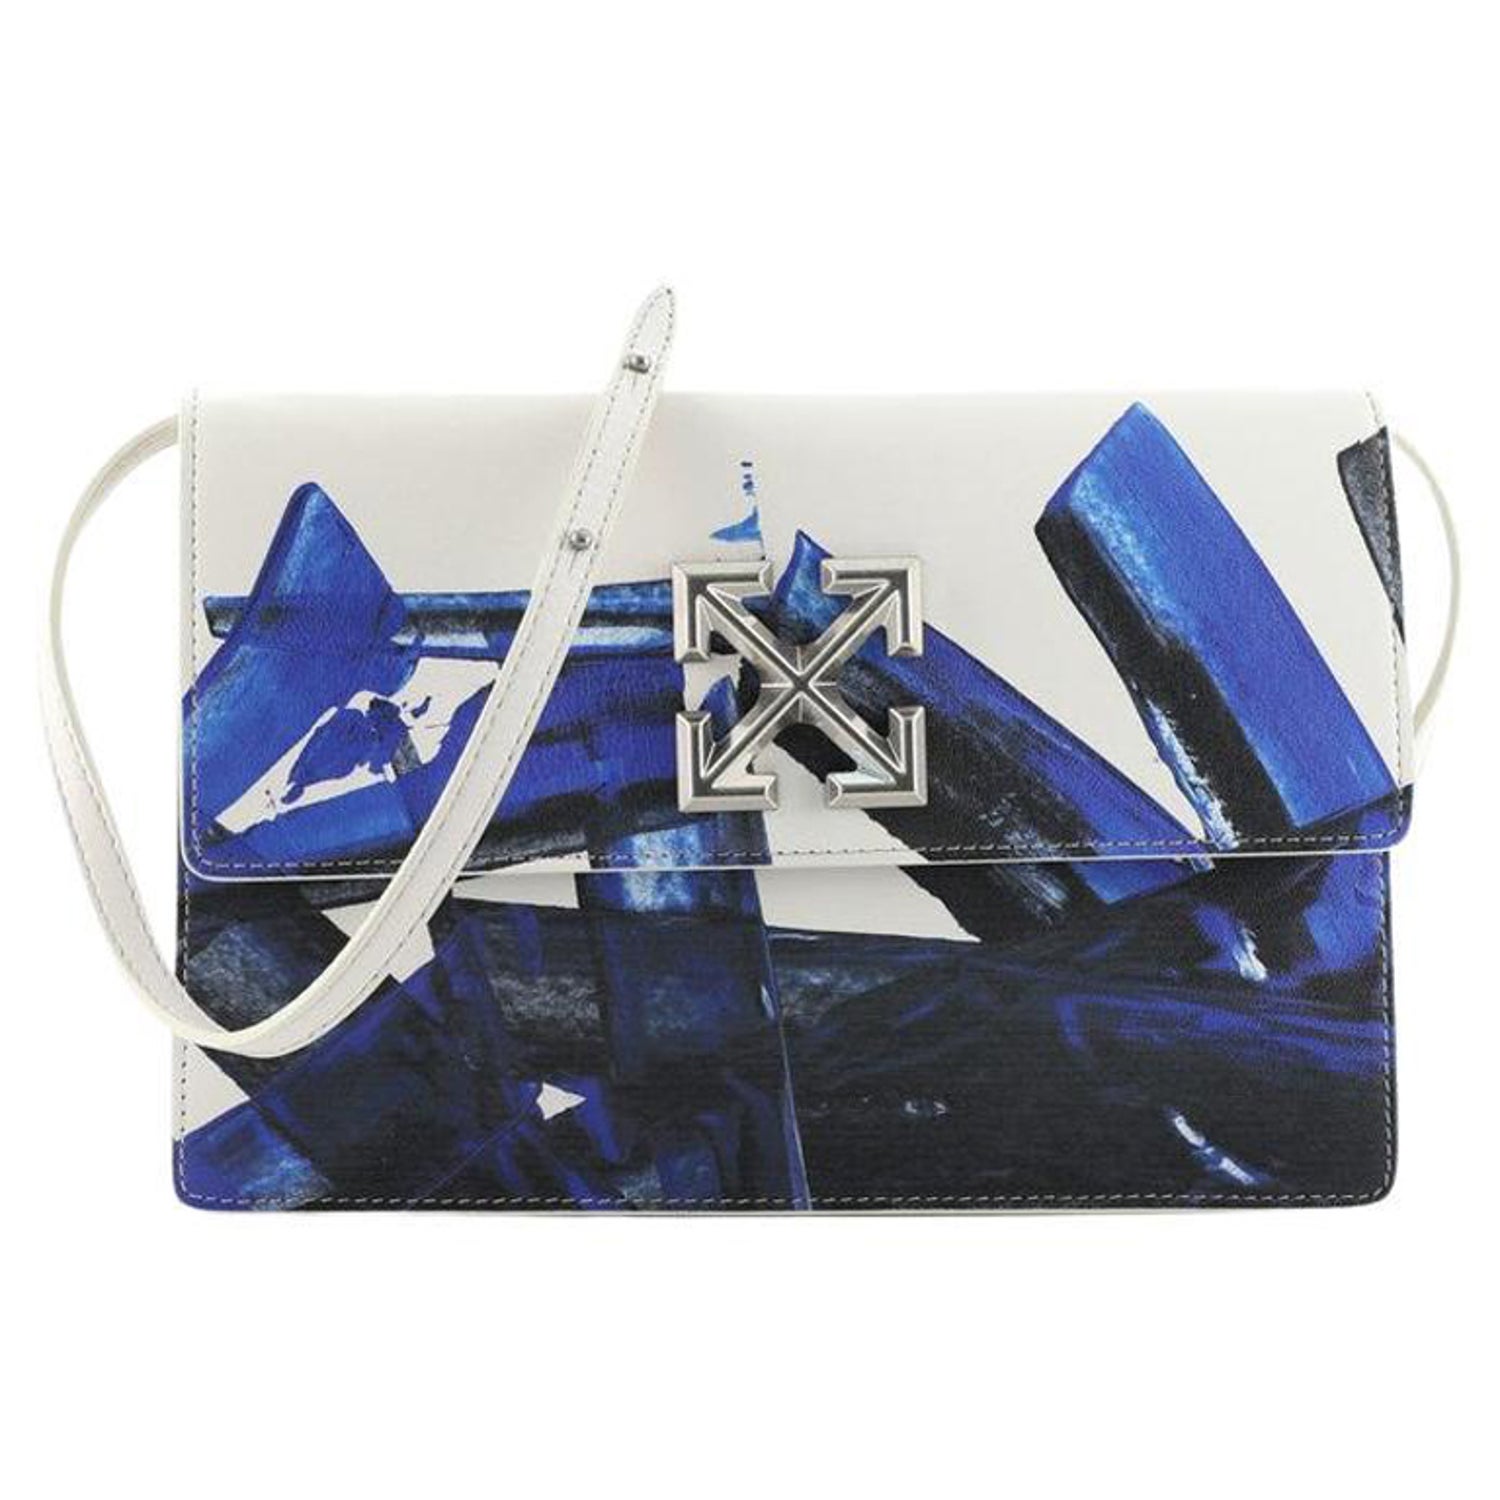 Jitney 1.4 leather handbag Off-White Blue in Leather - 36368272